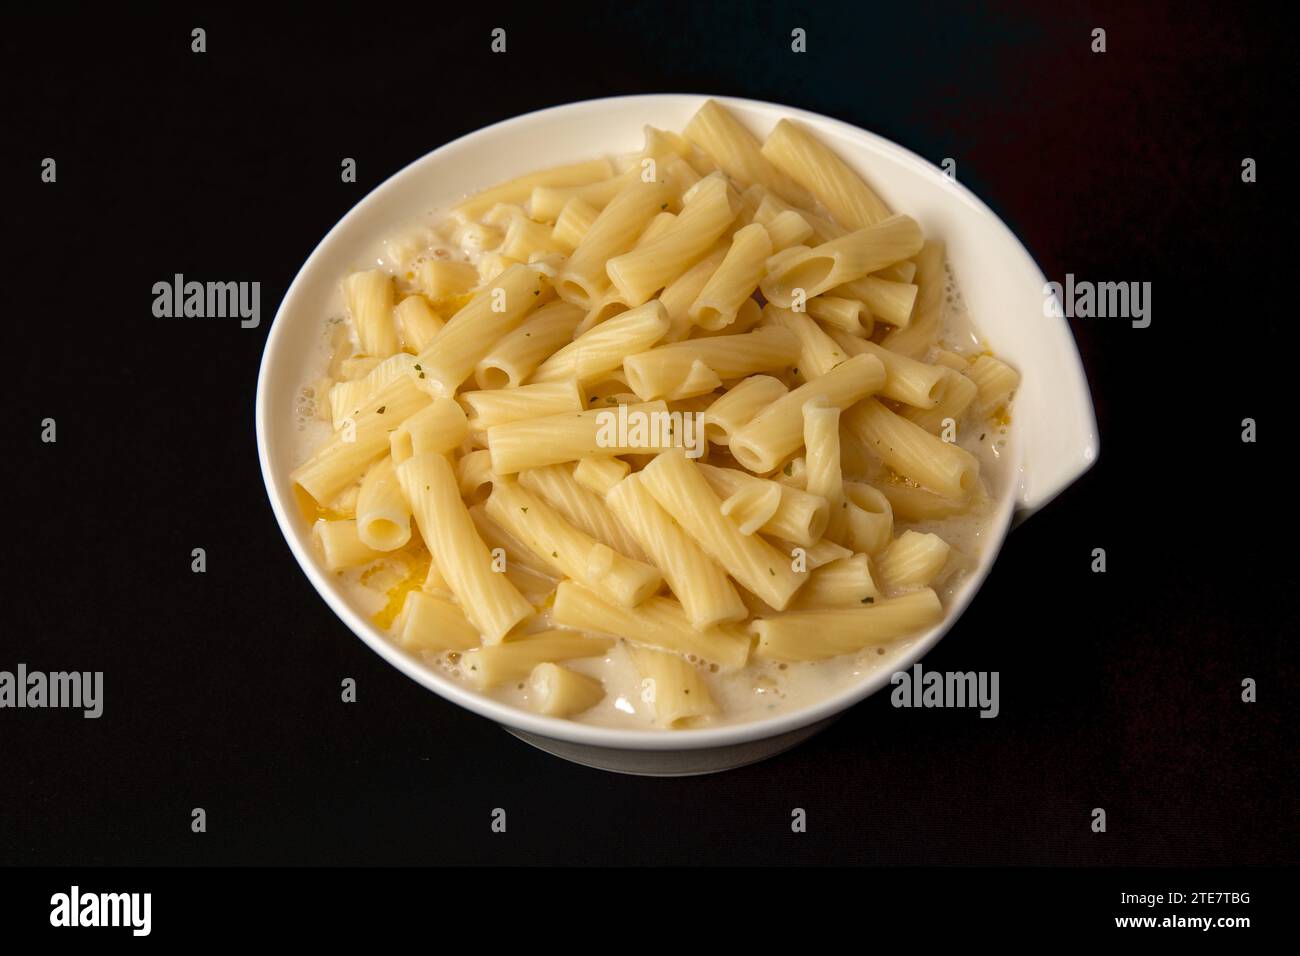 Top View if a Portion of Macaroni and Cheese in a white bowl Stock Photo